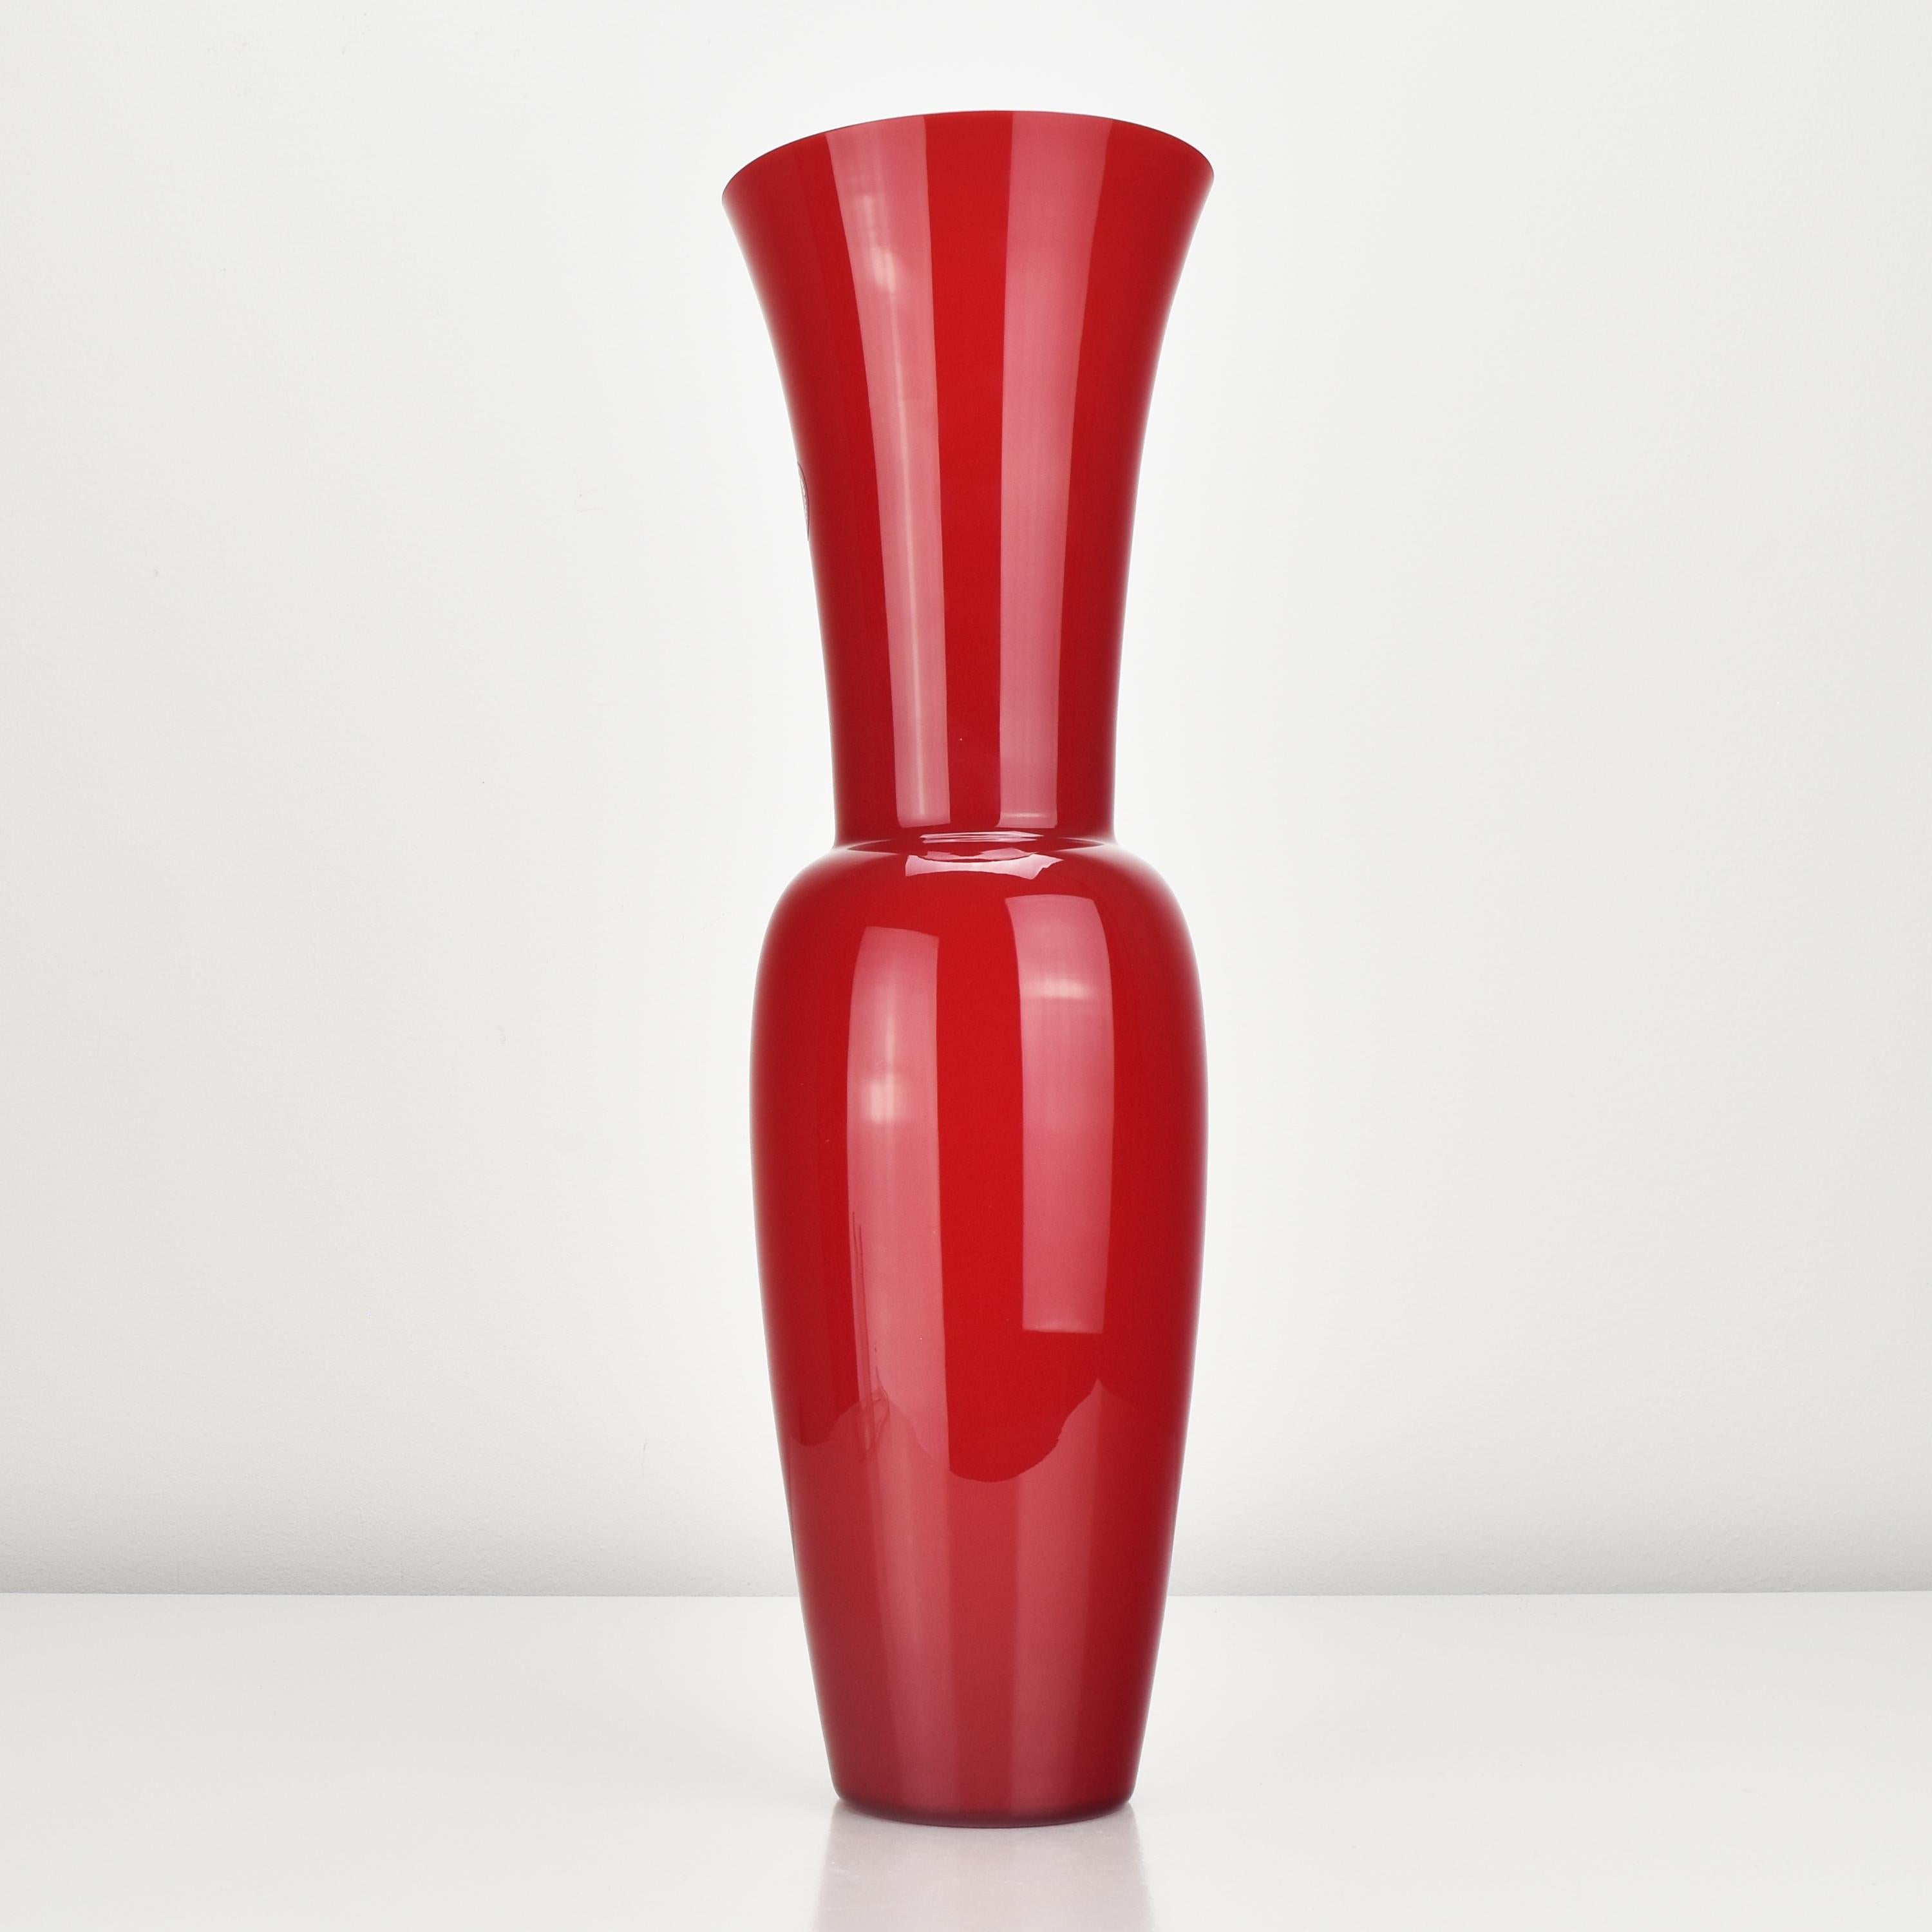 Elegant red opaline glass Vase by Carlo Nason of the 